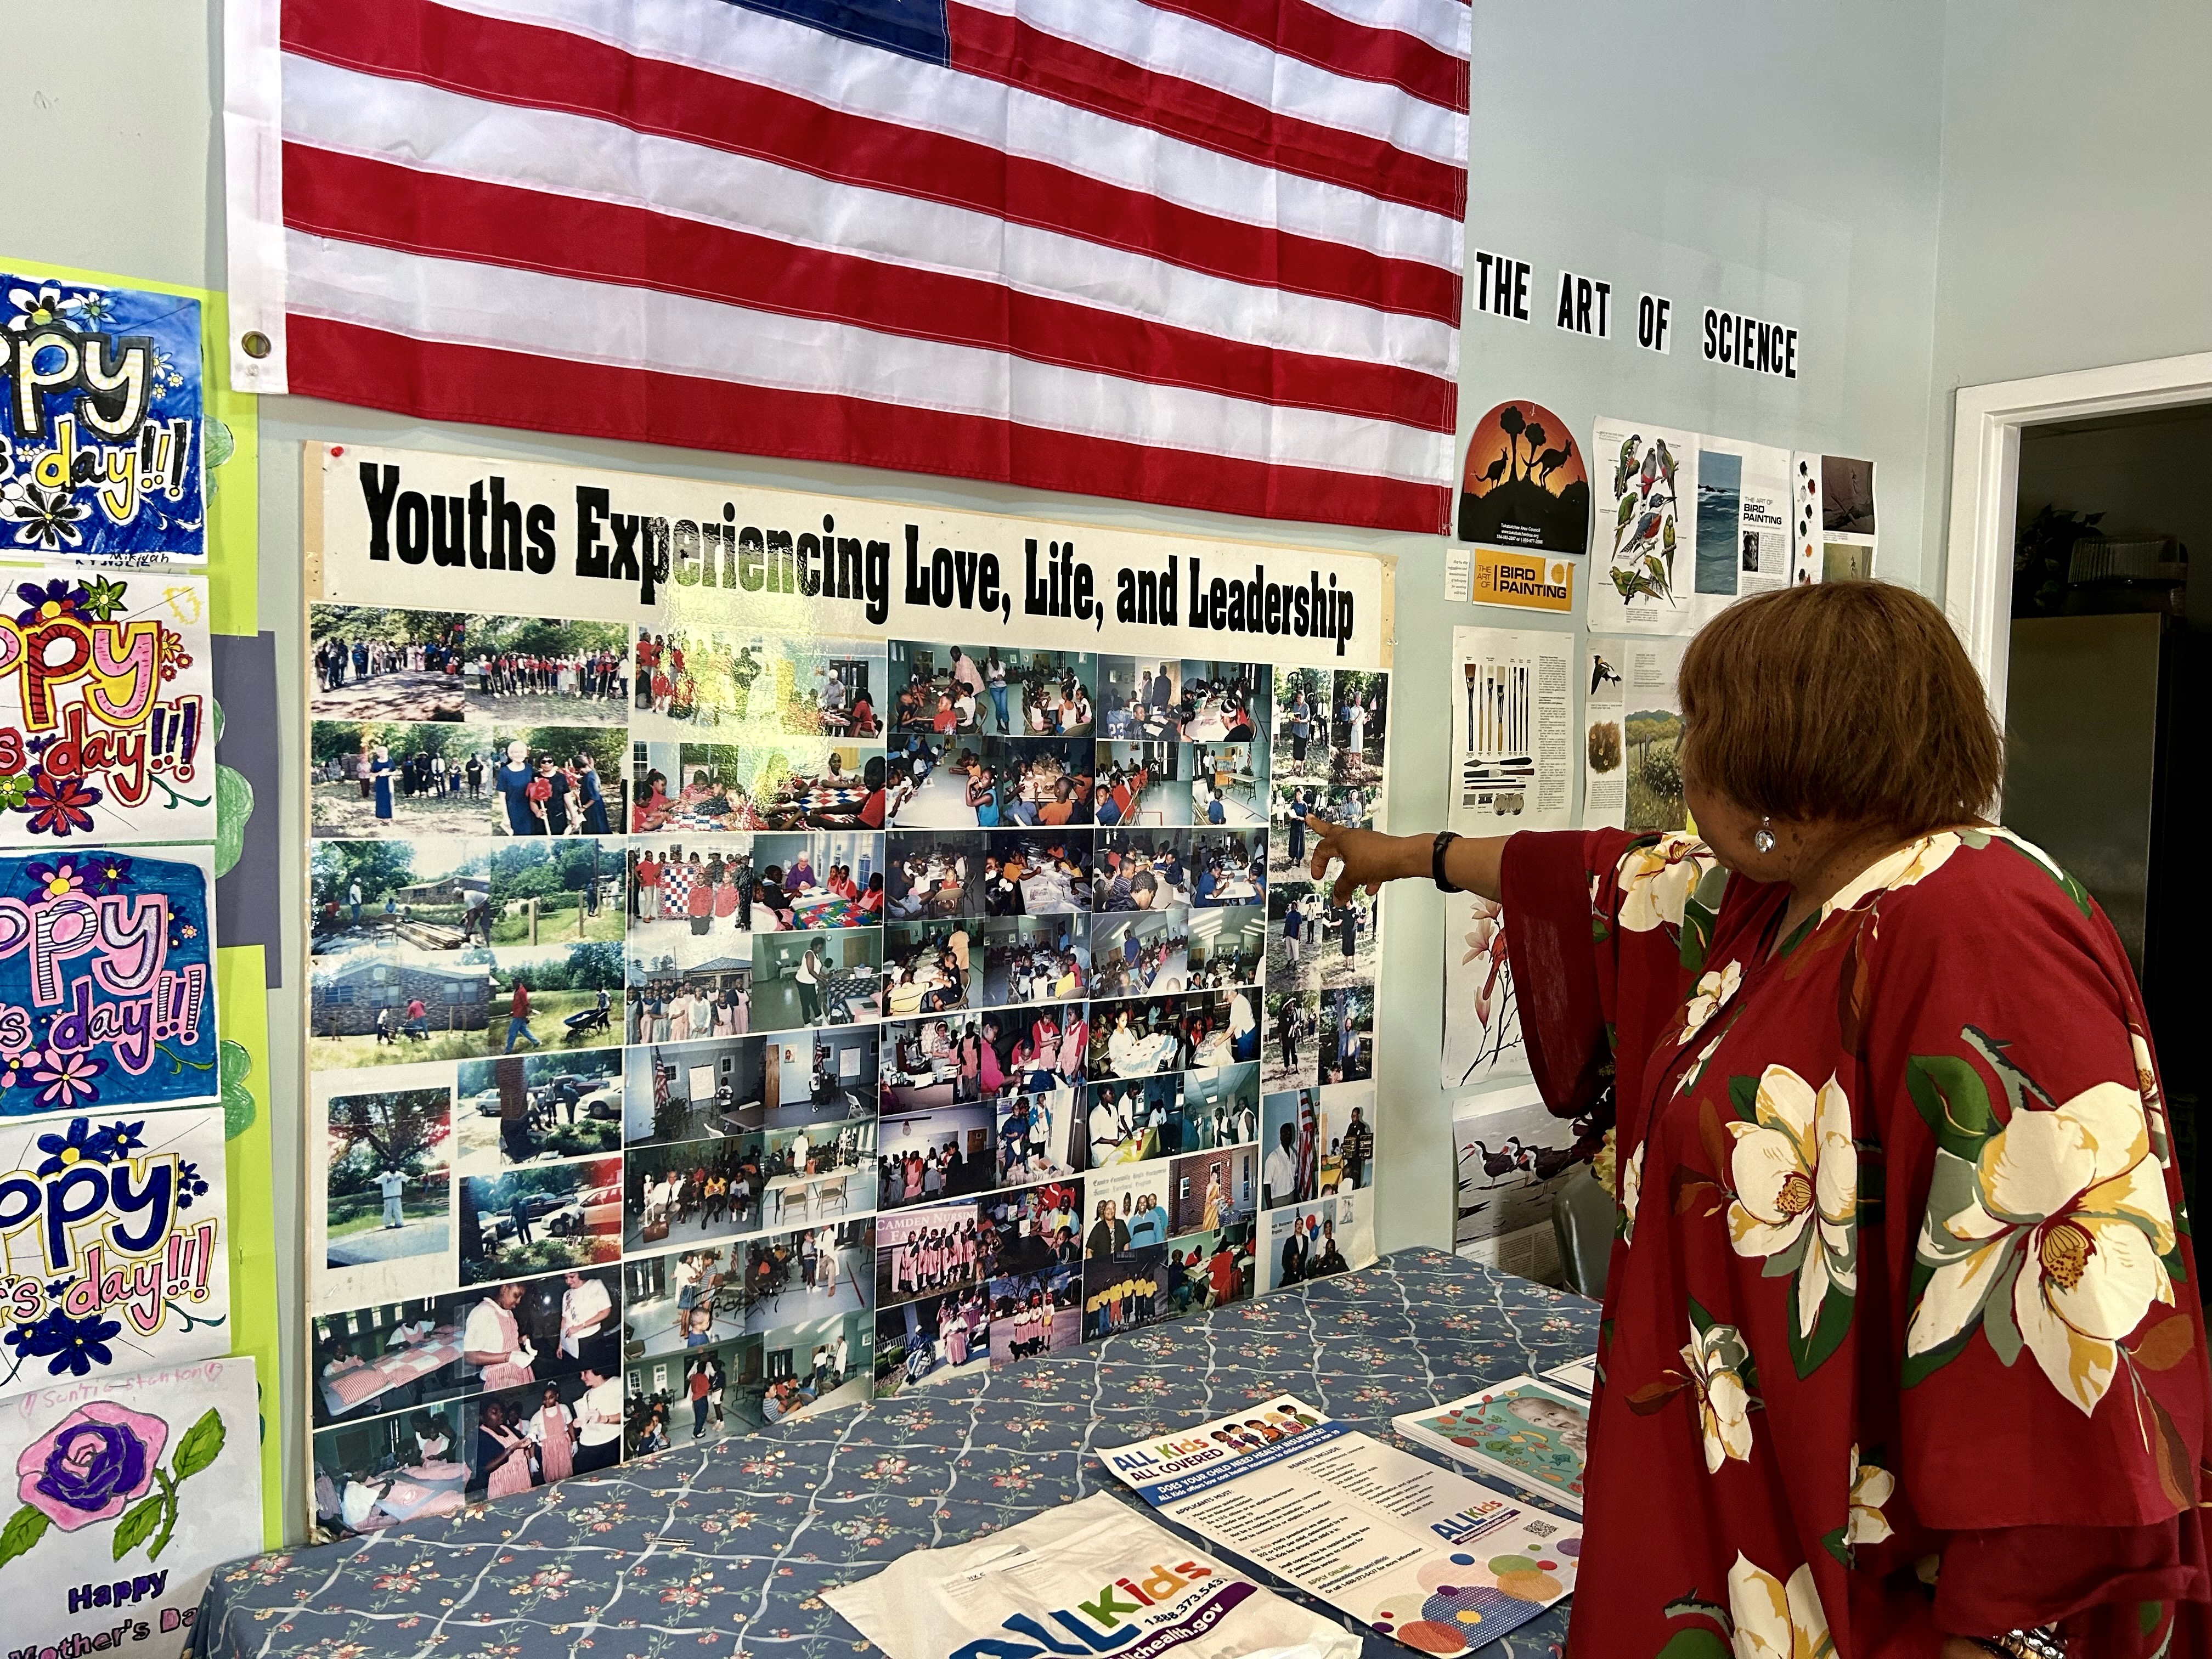 Alfreda G. Williams reflects on the history of the Camden Community Youth Development Center.